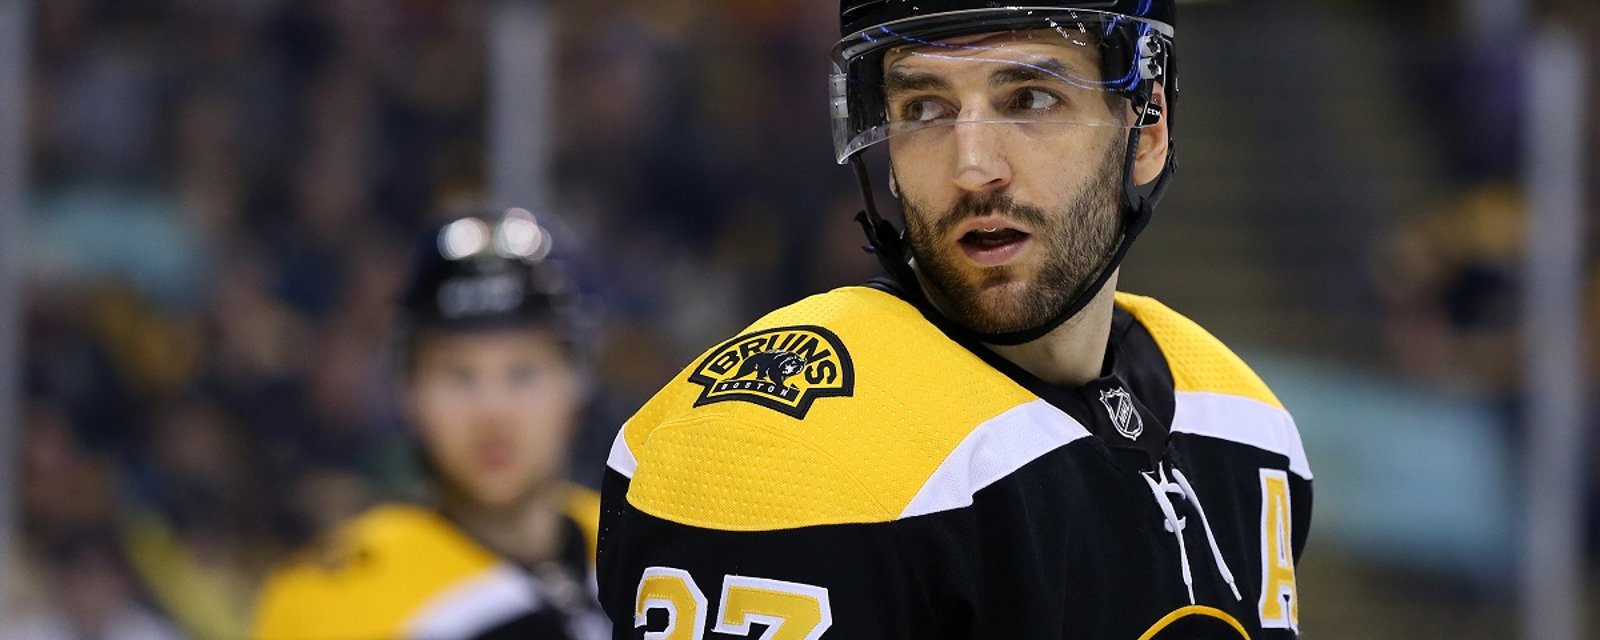 Huge update on Patrice Bergeron from Bruins coach Bruce Cassidy.